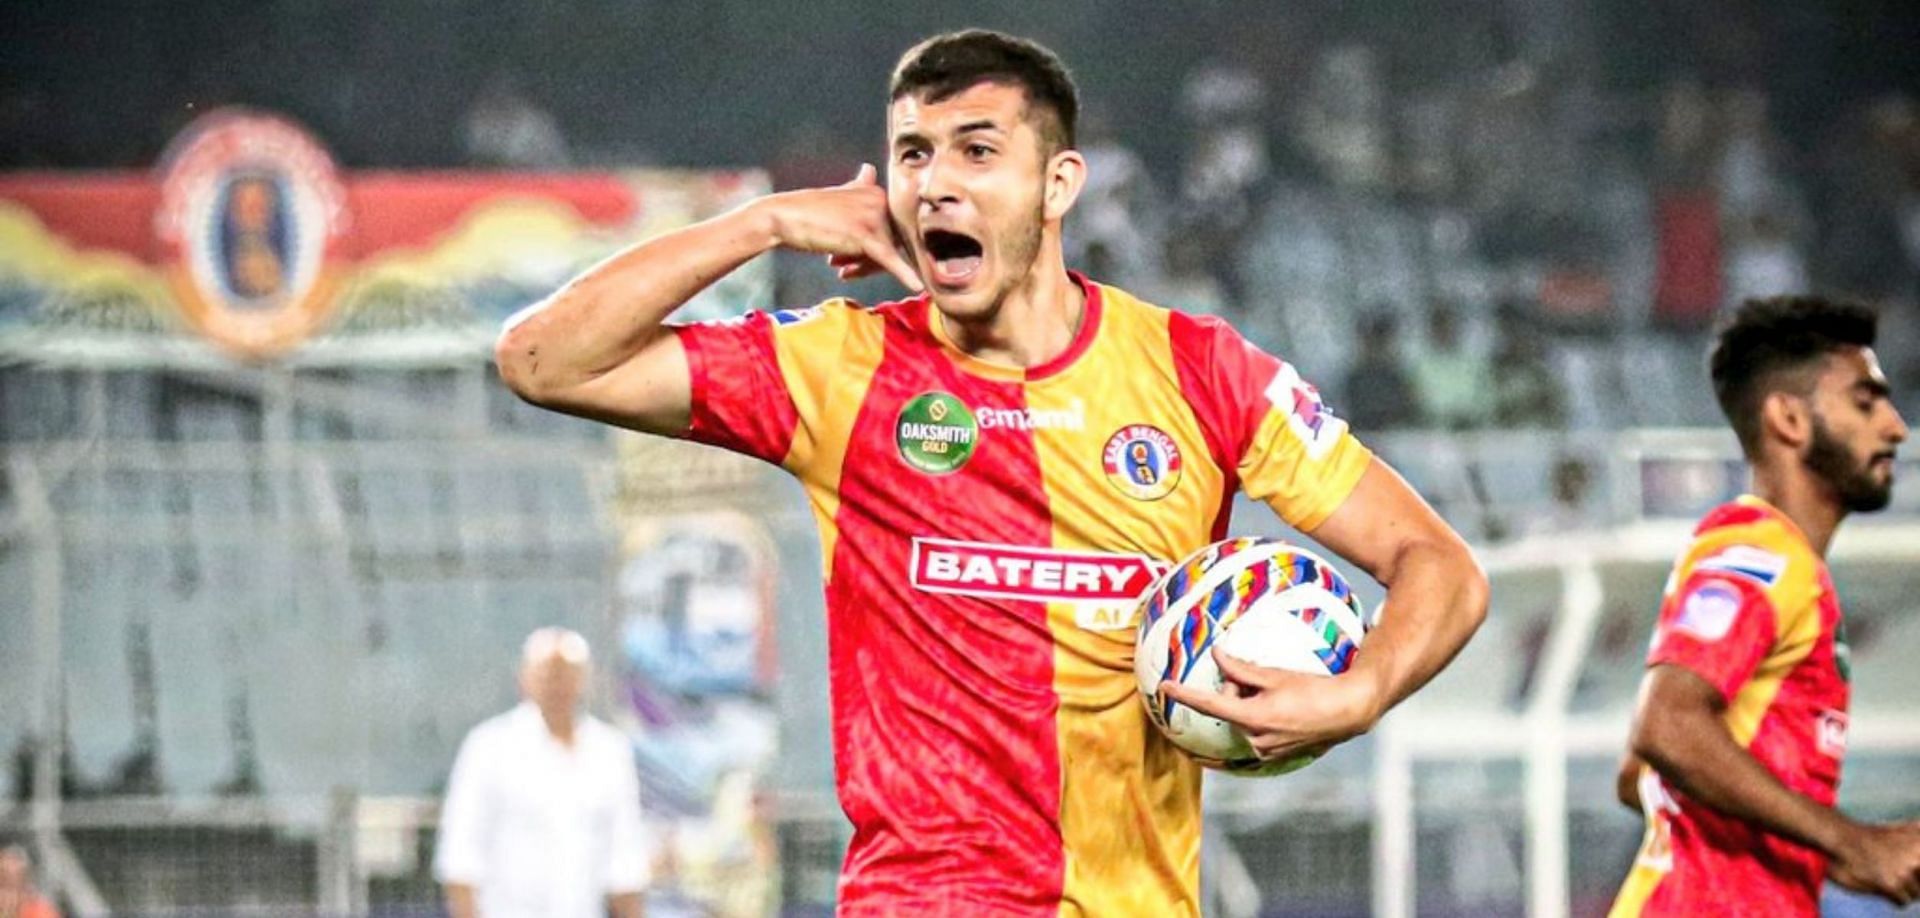 East Bengal FC midfielder Saul Crespo to sign a two-year contract extension